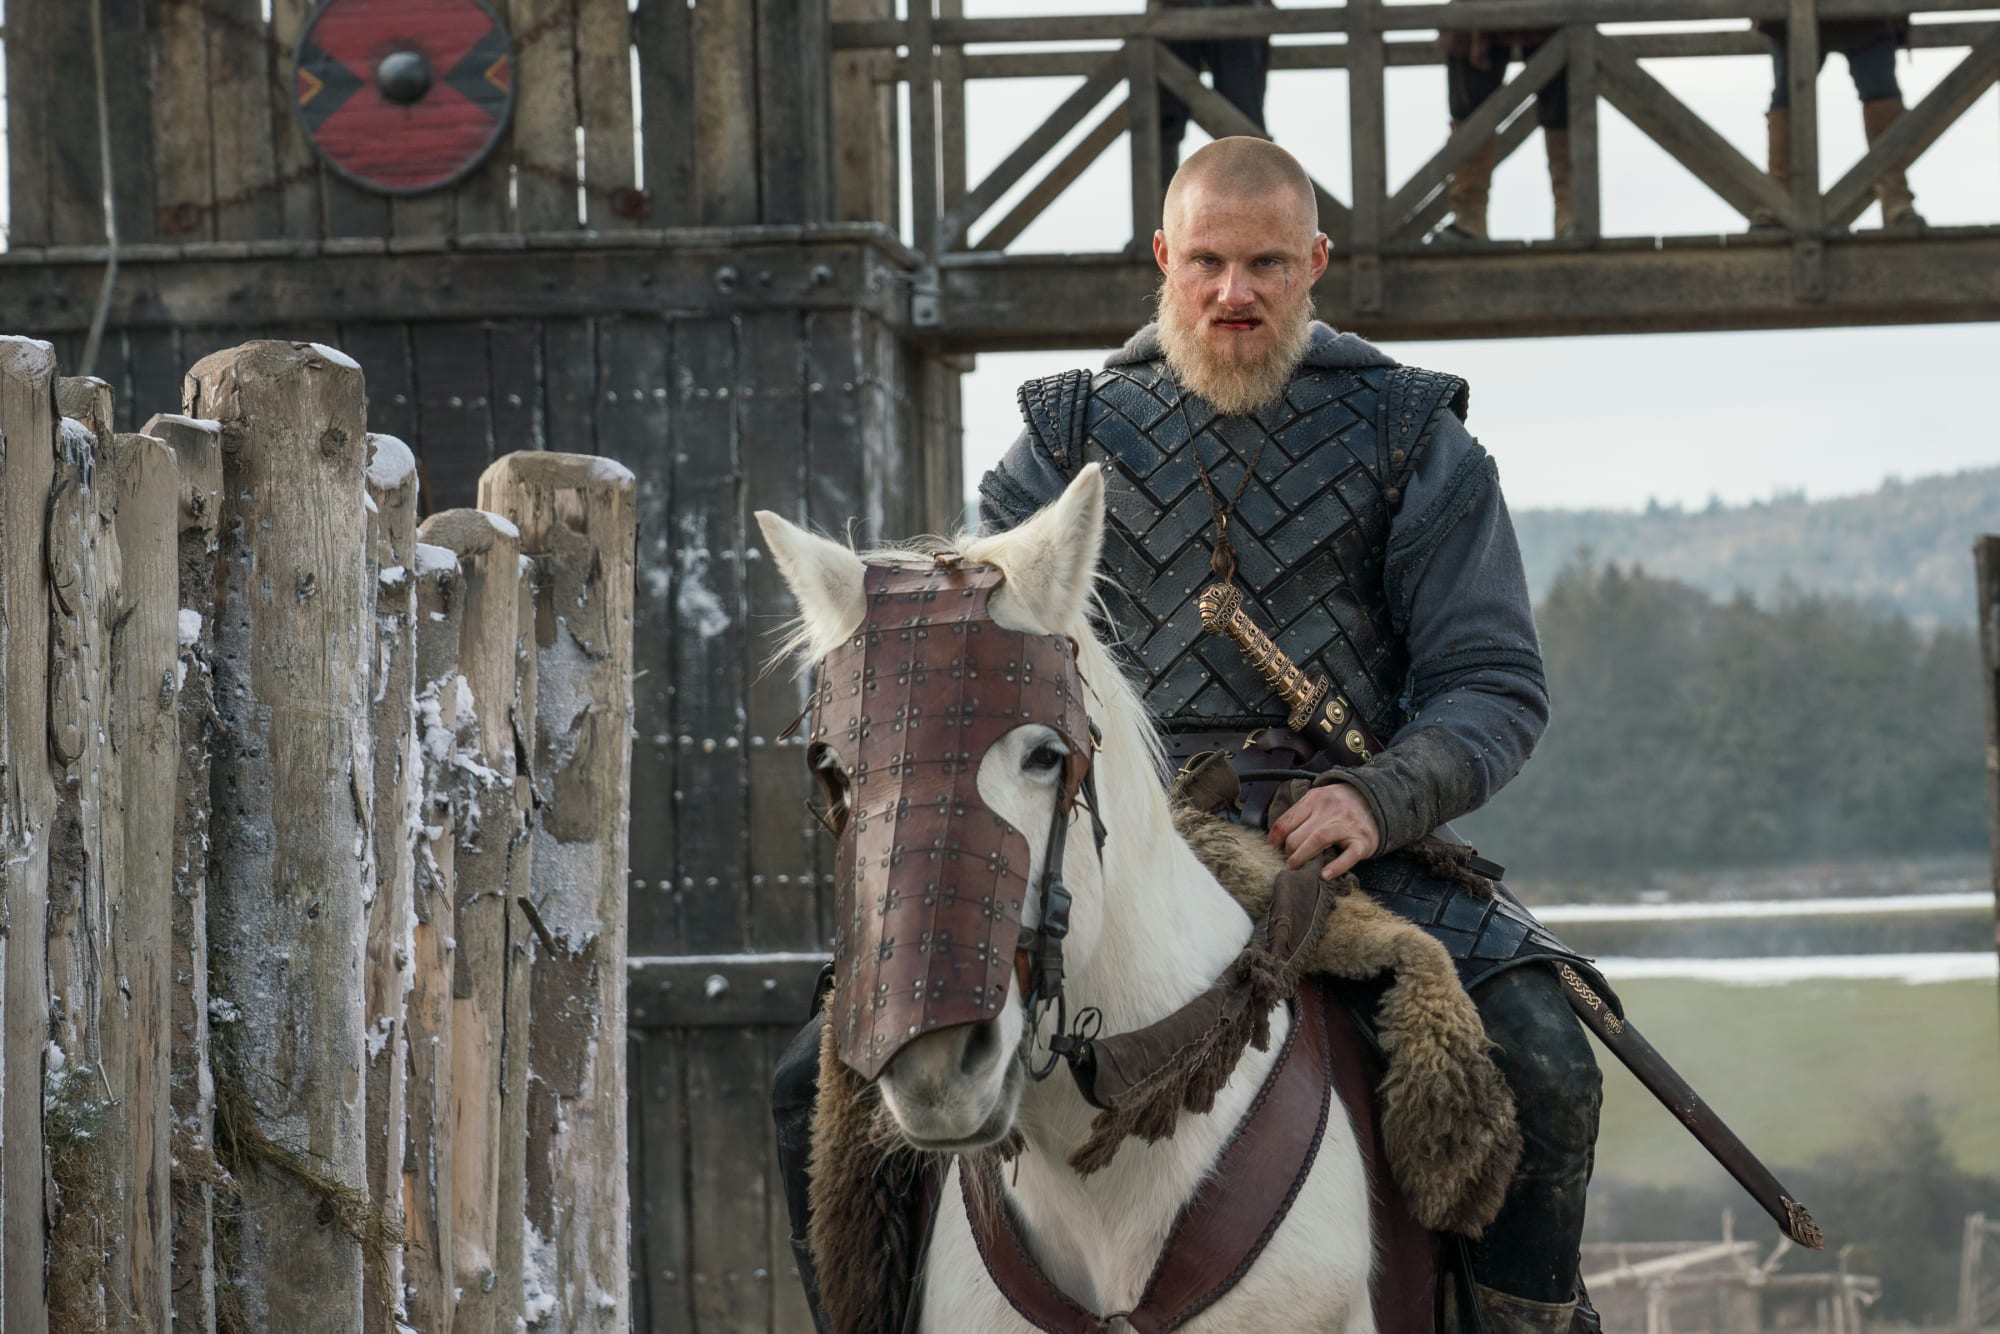 Vikings' Season 6 Episode 10: Could Bjorn Ironside's death be just a  cliffhanger and not what actually happened?